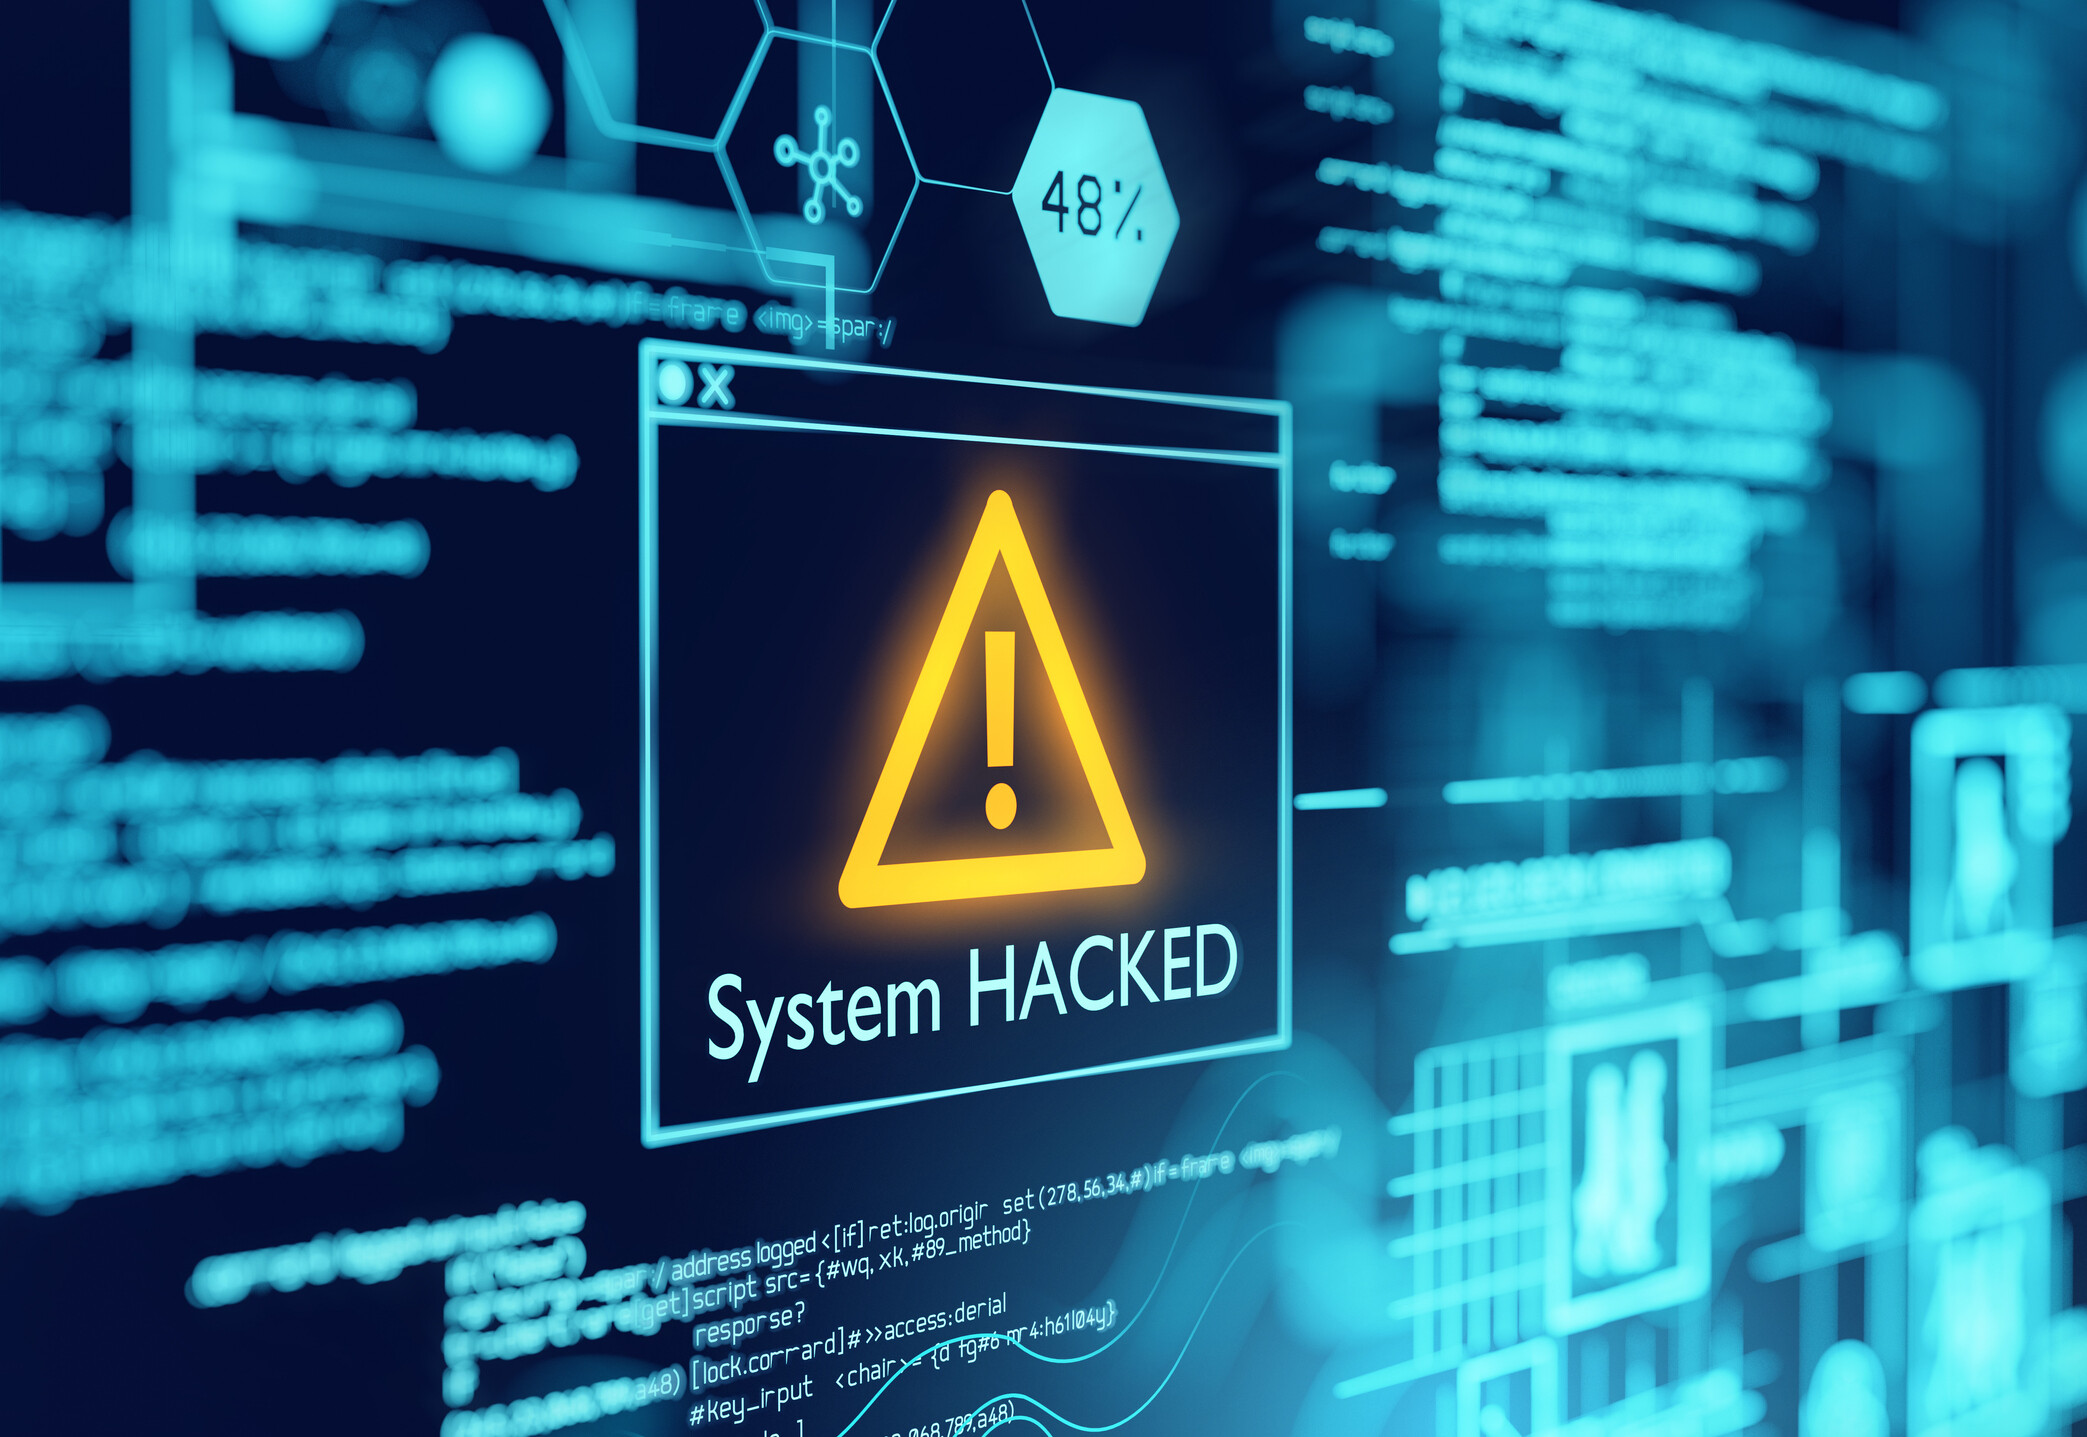 What to do if your business has been hacked